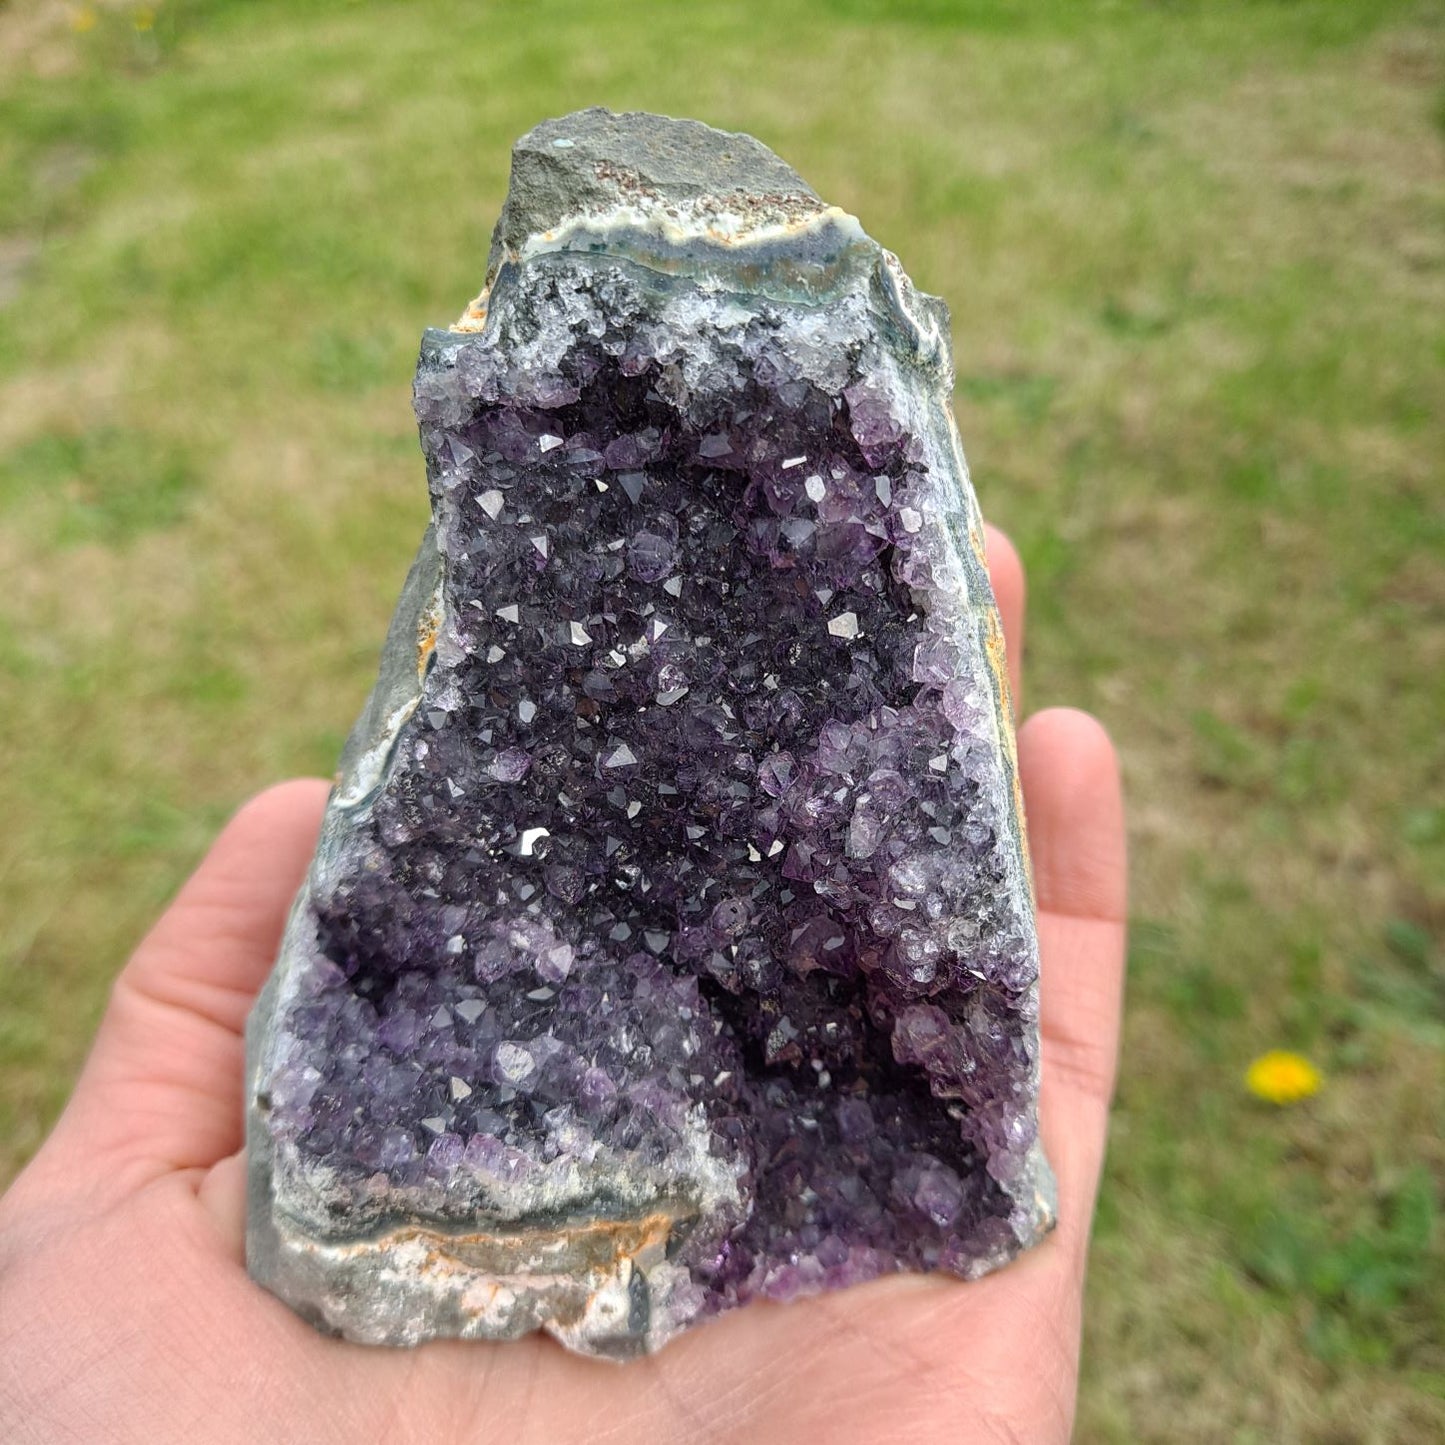 Dumi's Crystals | Amethyst Cluster (Portable, 9cm) in hand (side view) | Feel the intricate crystals of this Amethyst Cluster (9 x 7.6 x 7.6cm) as you hold it in your hand. Let its gentle energy wash over you, promoting relaxation and emotional balance.